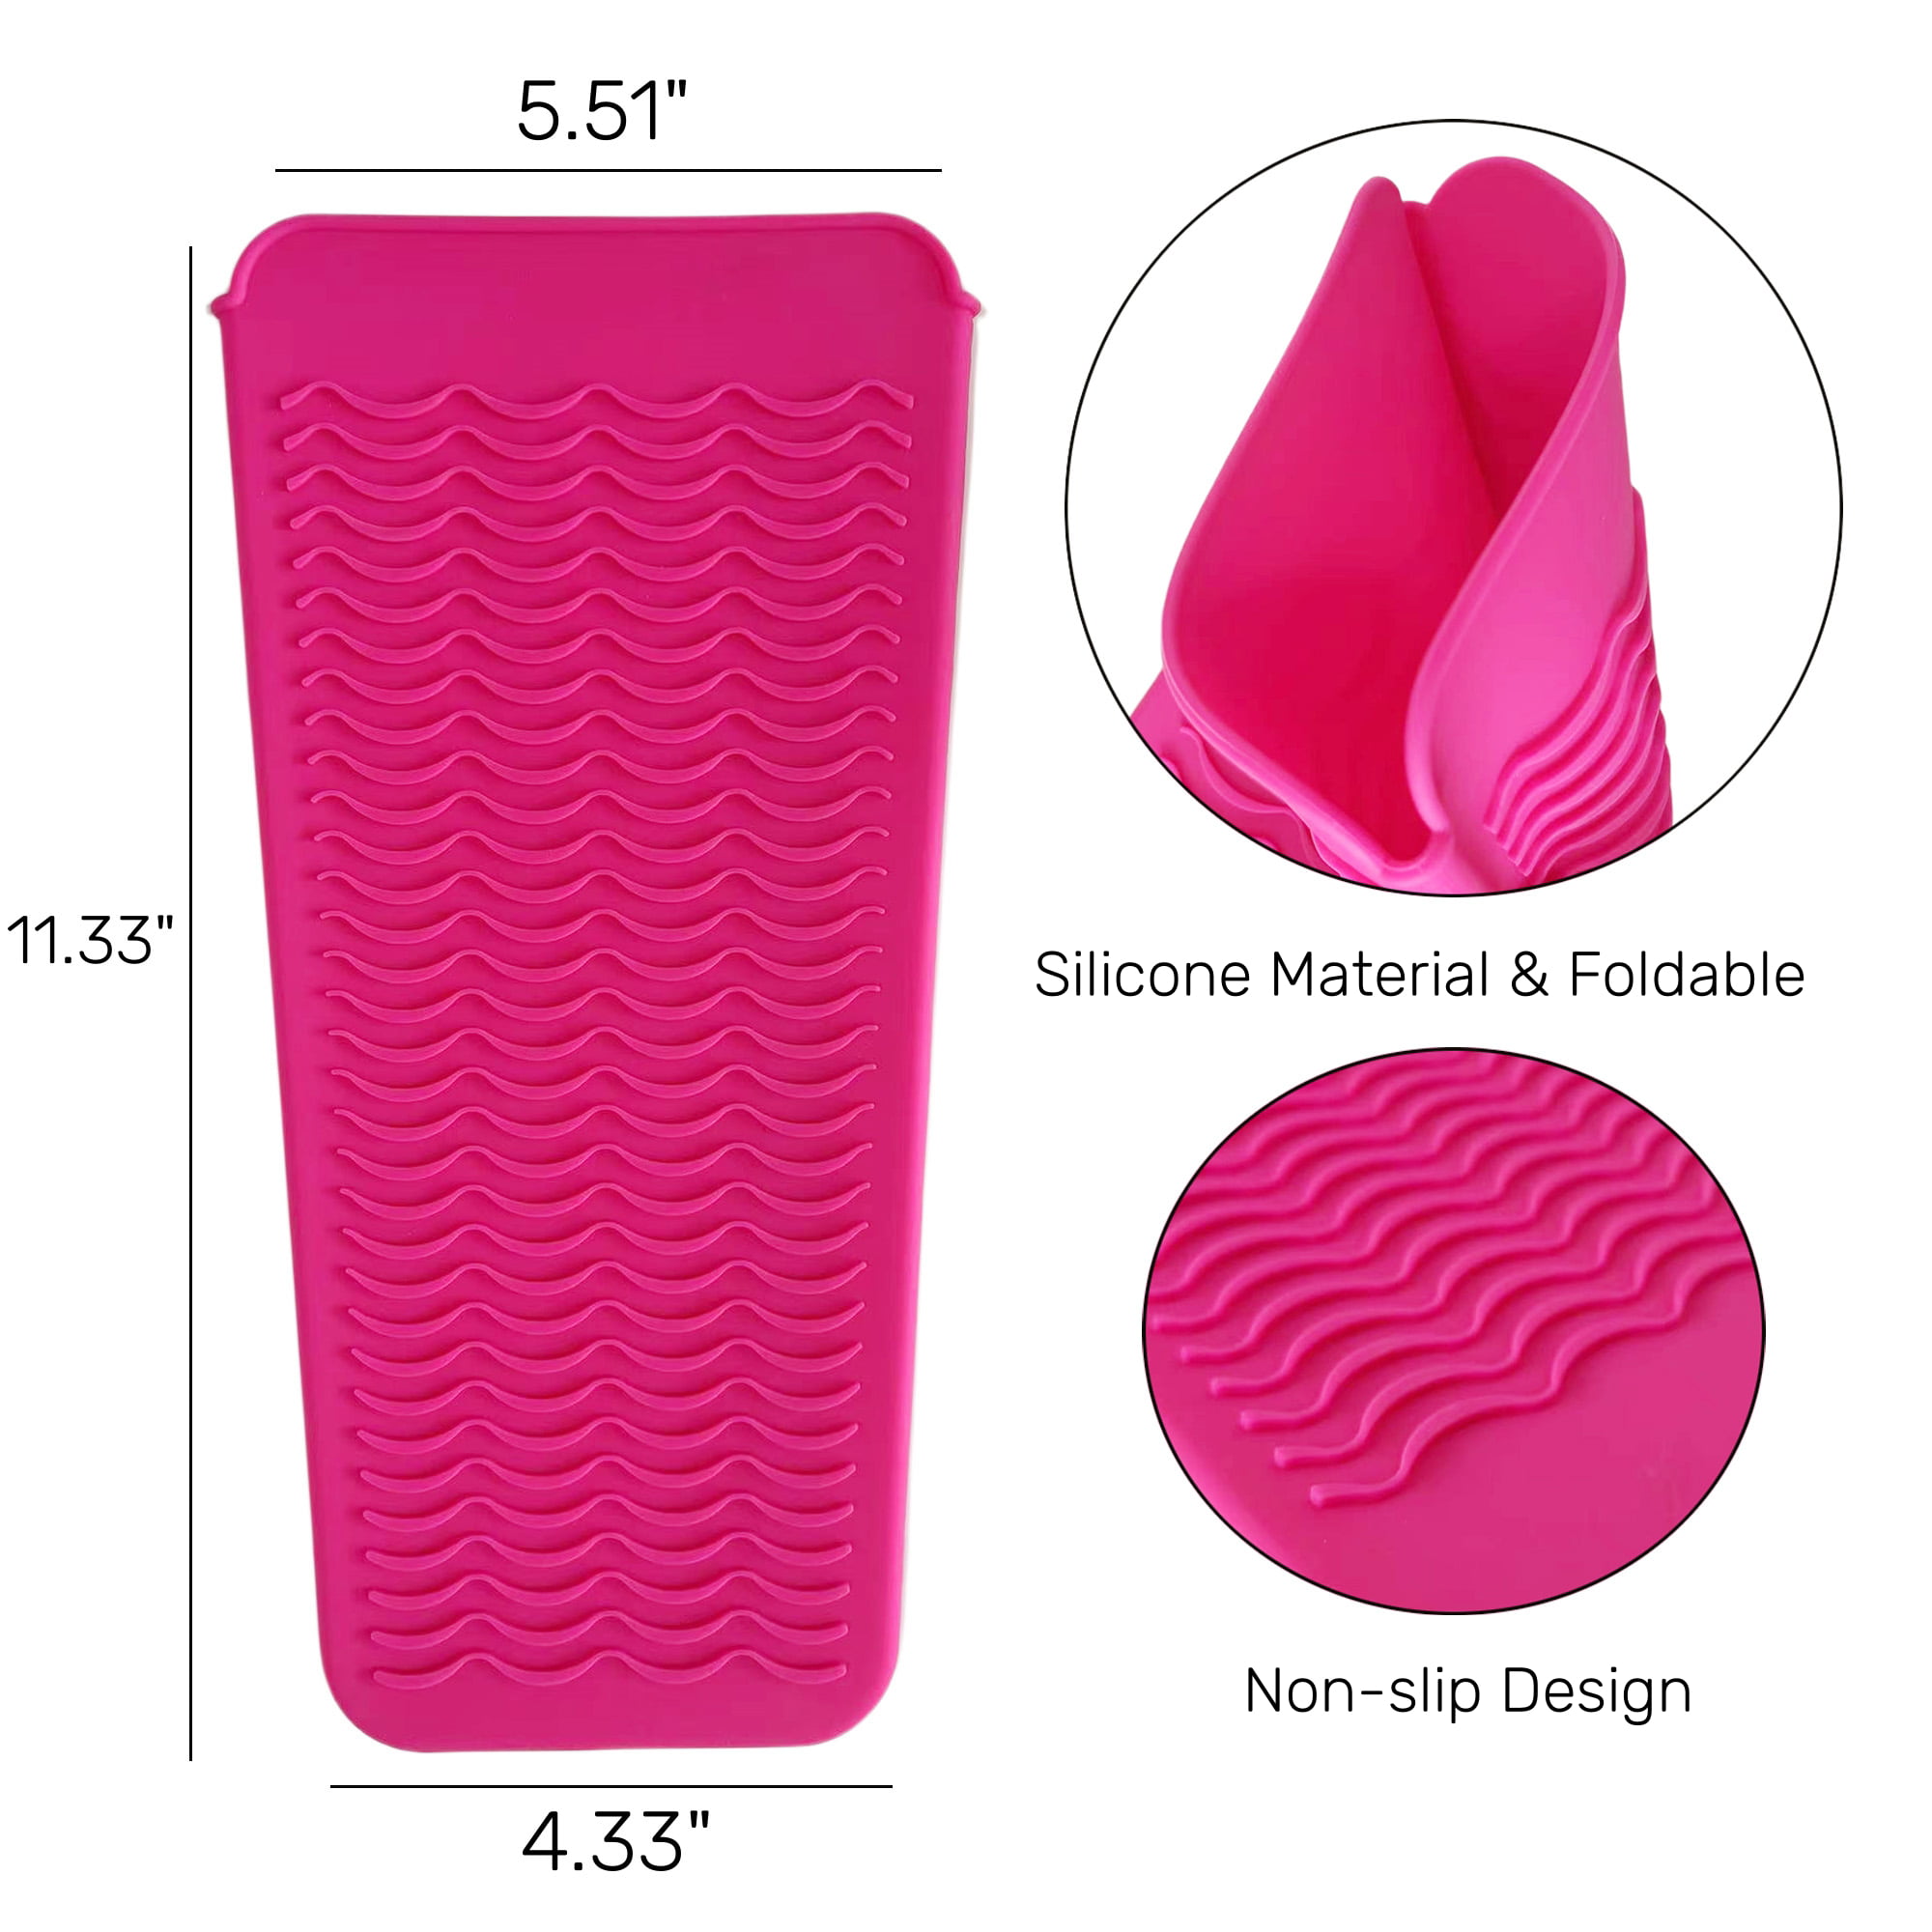 Tooyful Heat Resistant Mat Pouch Silicone for Curling Iron Hair Mat Straightener Curly Hair Rod Holder Travel Bag Case, Hot Hair Tools Heat Insulating Pad